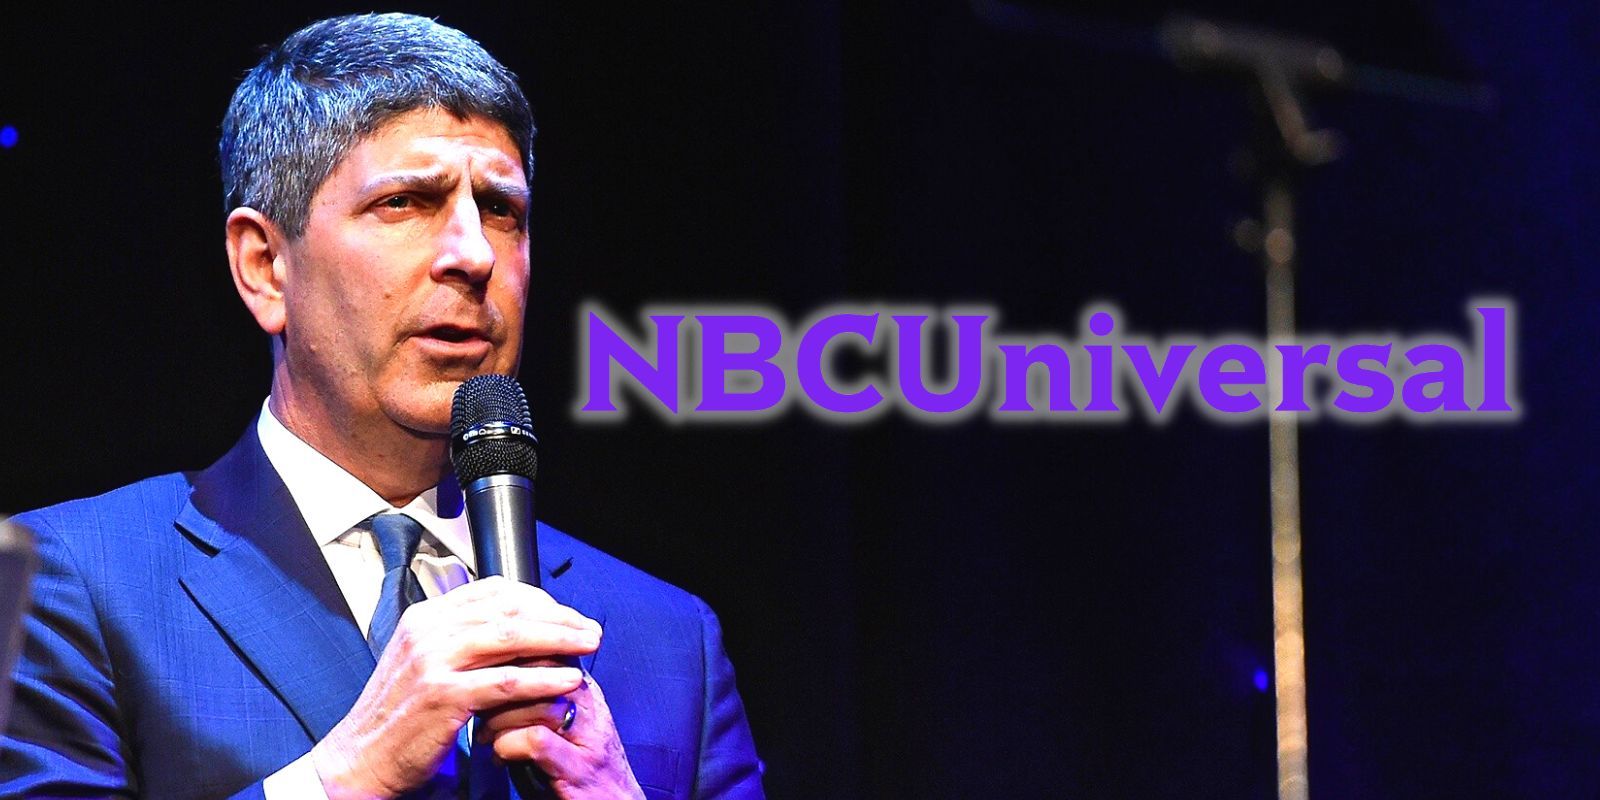 NBCUniversal CEO Jeff Shell with a microphone standing alongside the company's logo